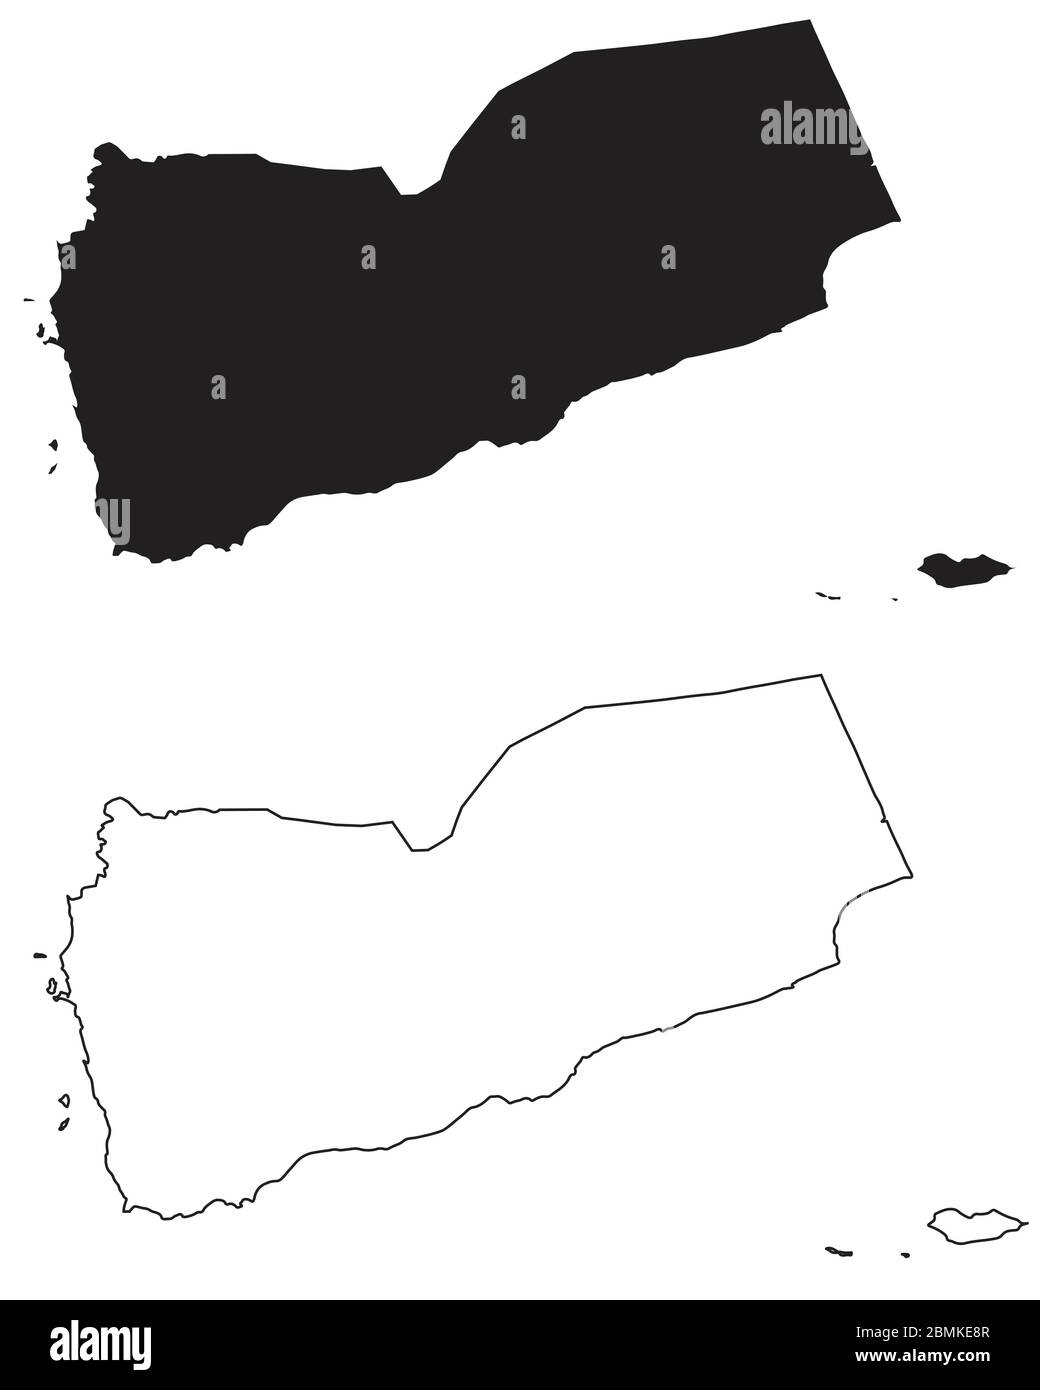 Yemen Country Map Black Silhouette And Outline Isolated On White Background Eps Vector Stock 